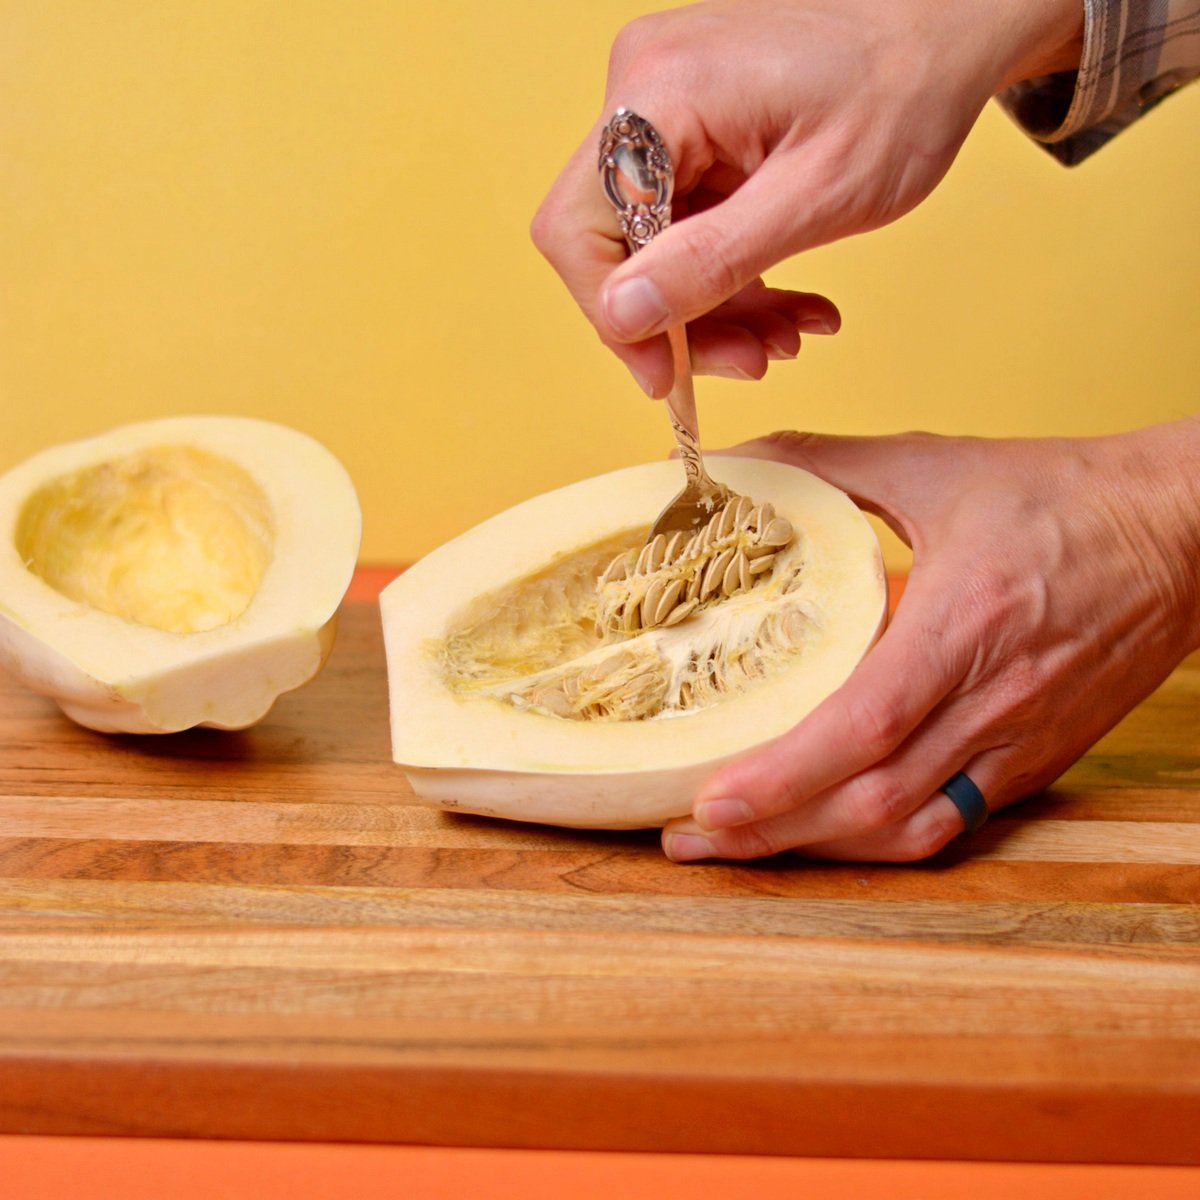 Using a spoon to scoop out seeds from a mashed potato squash.